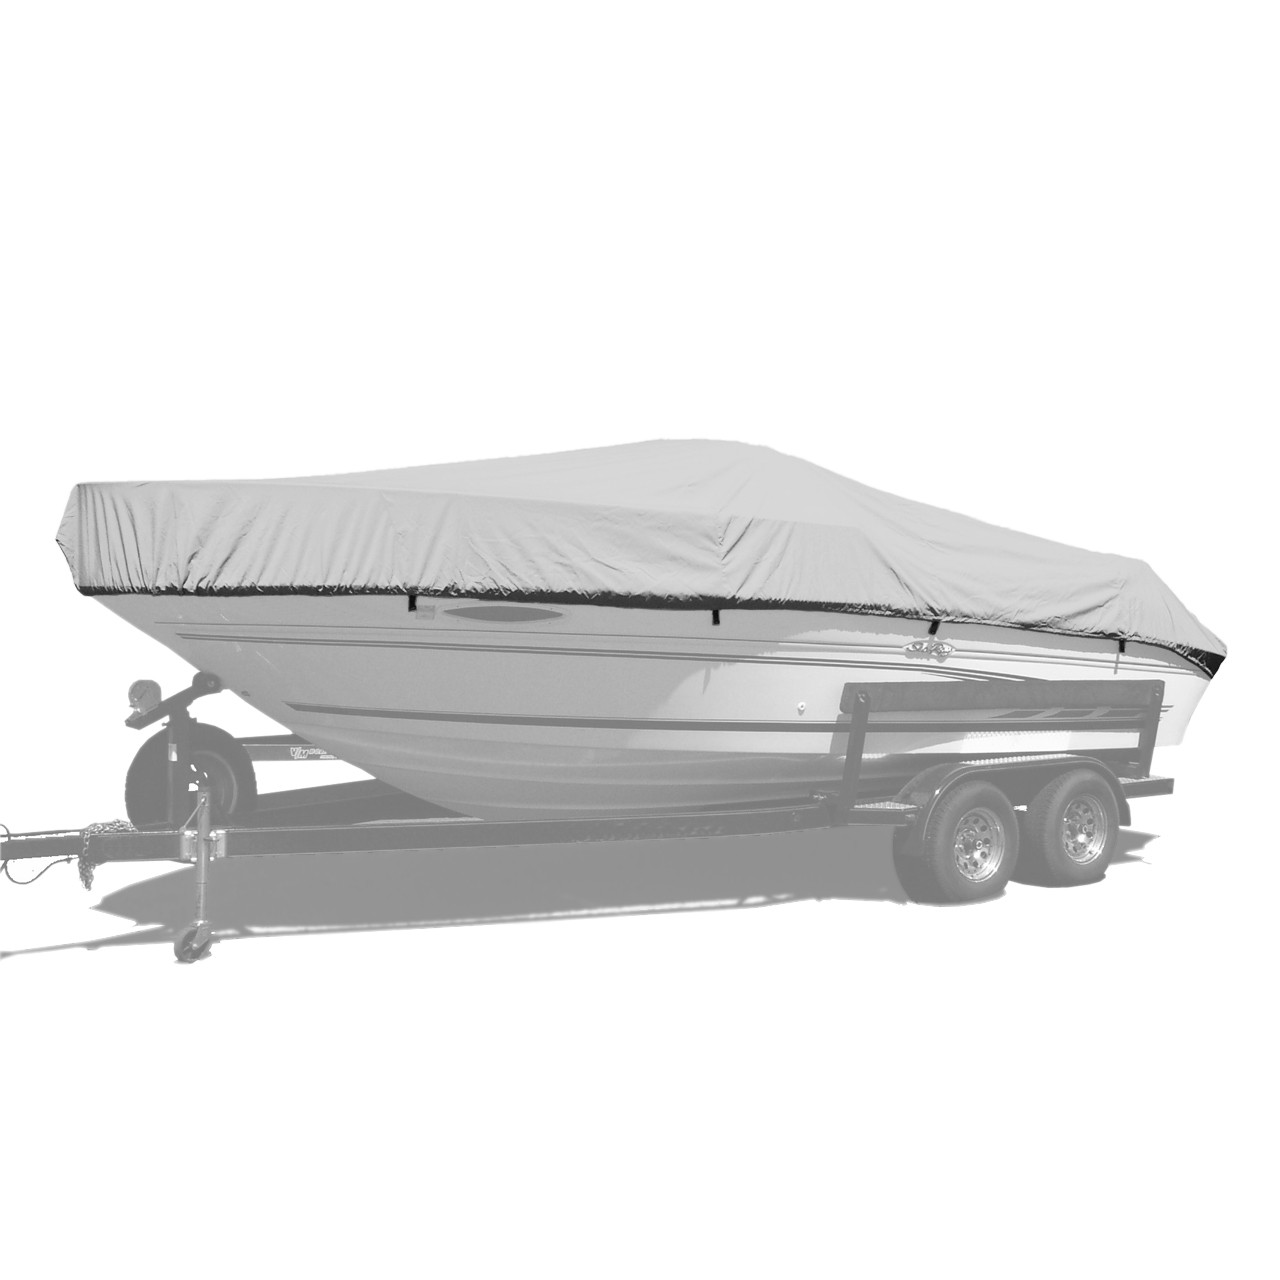 Bass Boat Cover, 19'6-20'5 x 102, Westland